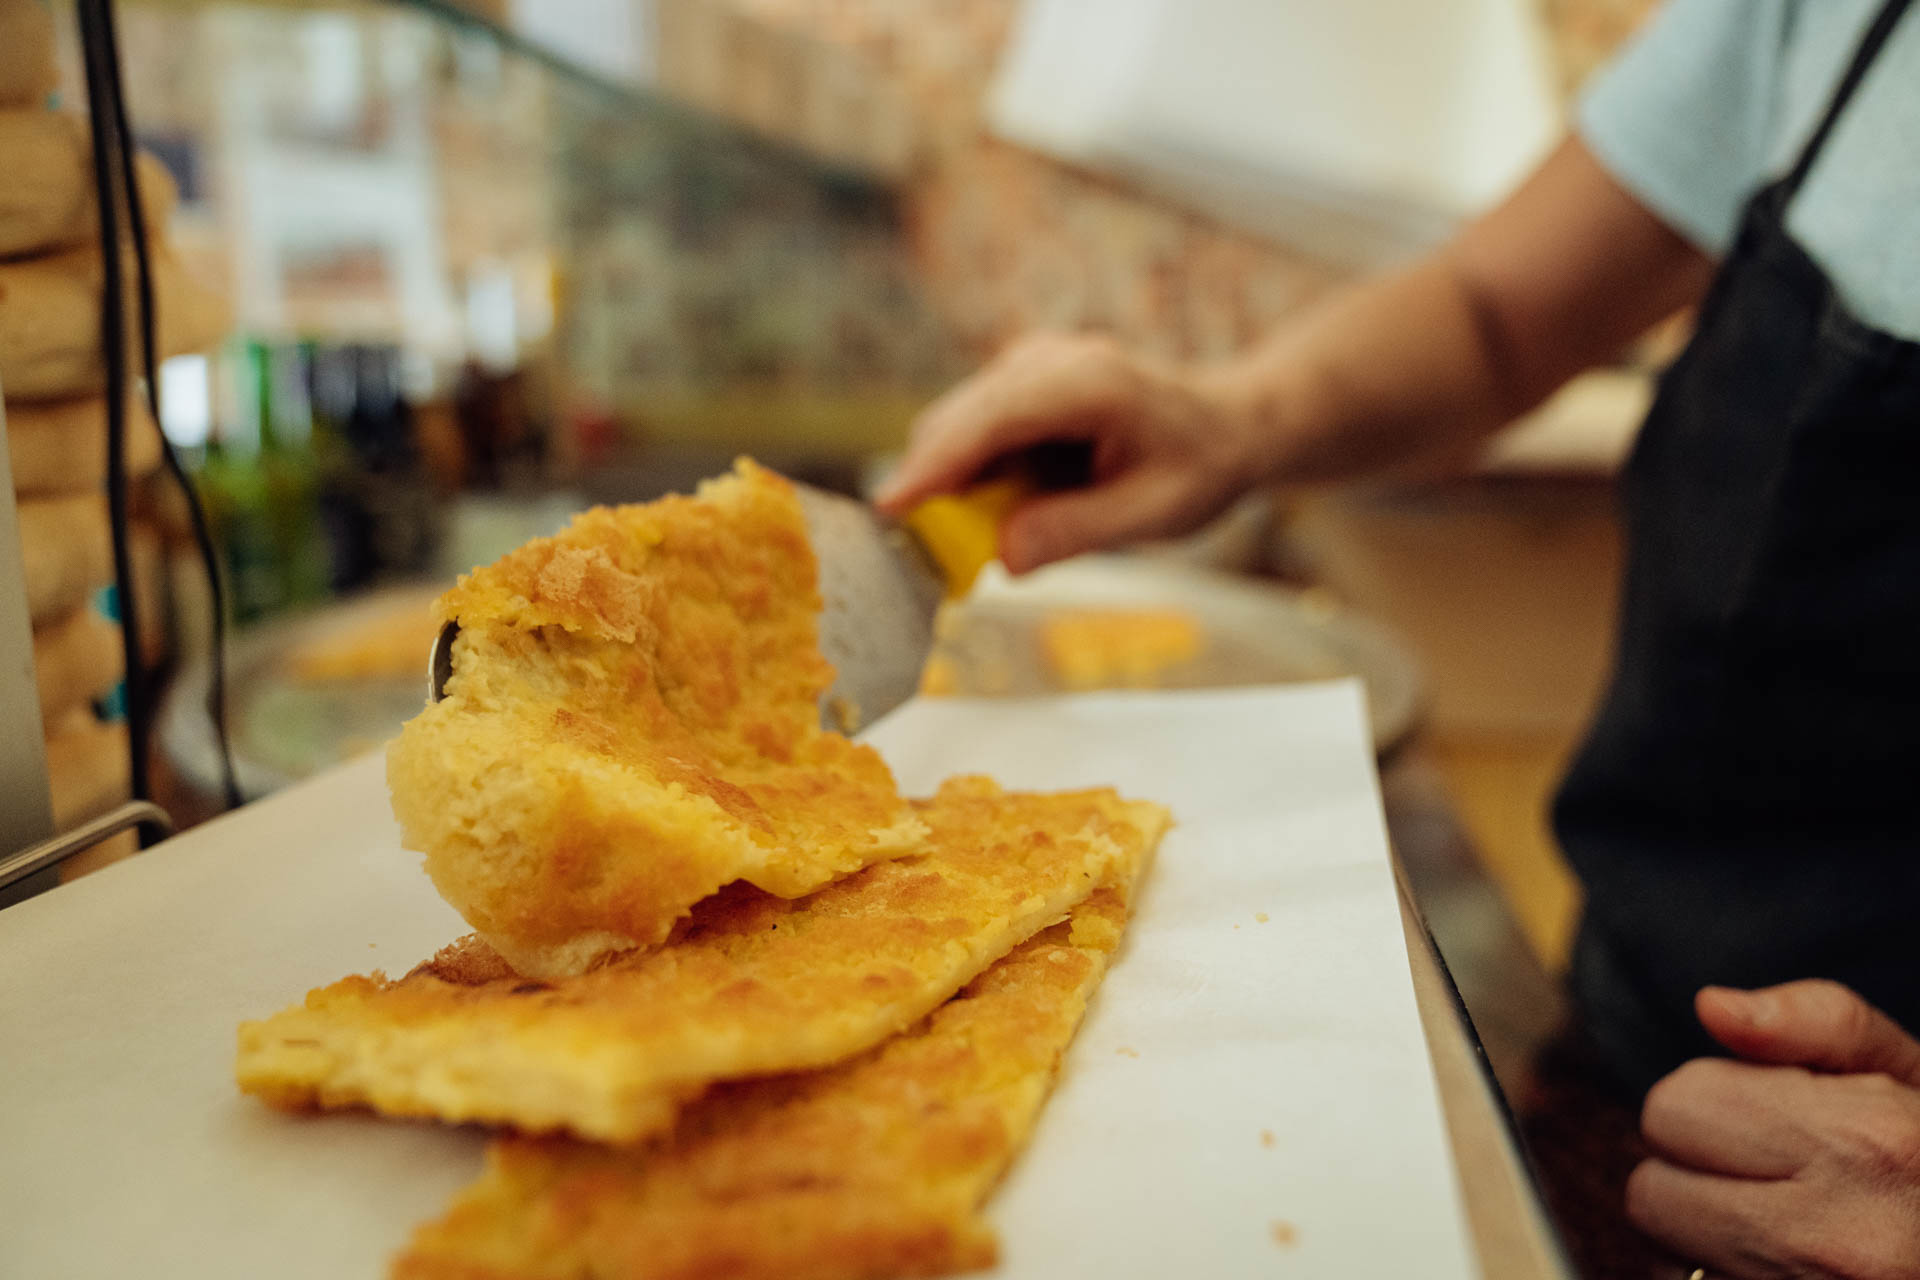 Livorno’s typical street food